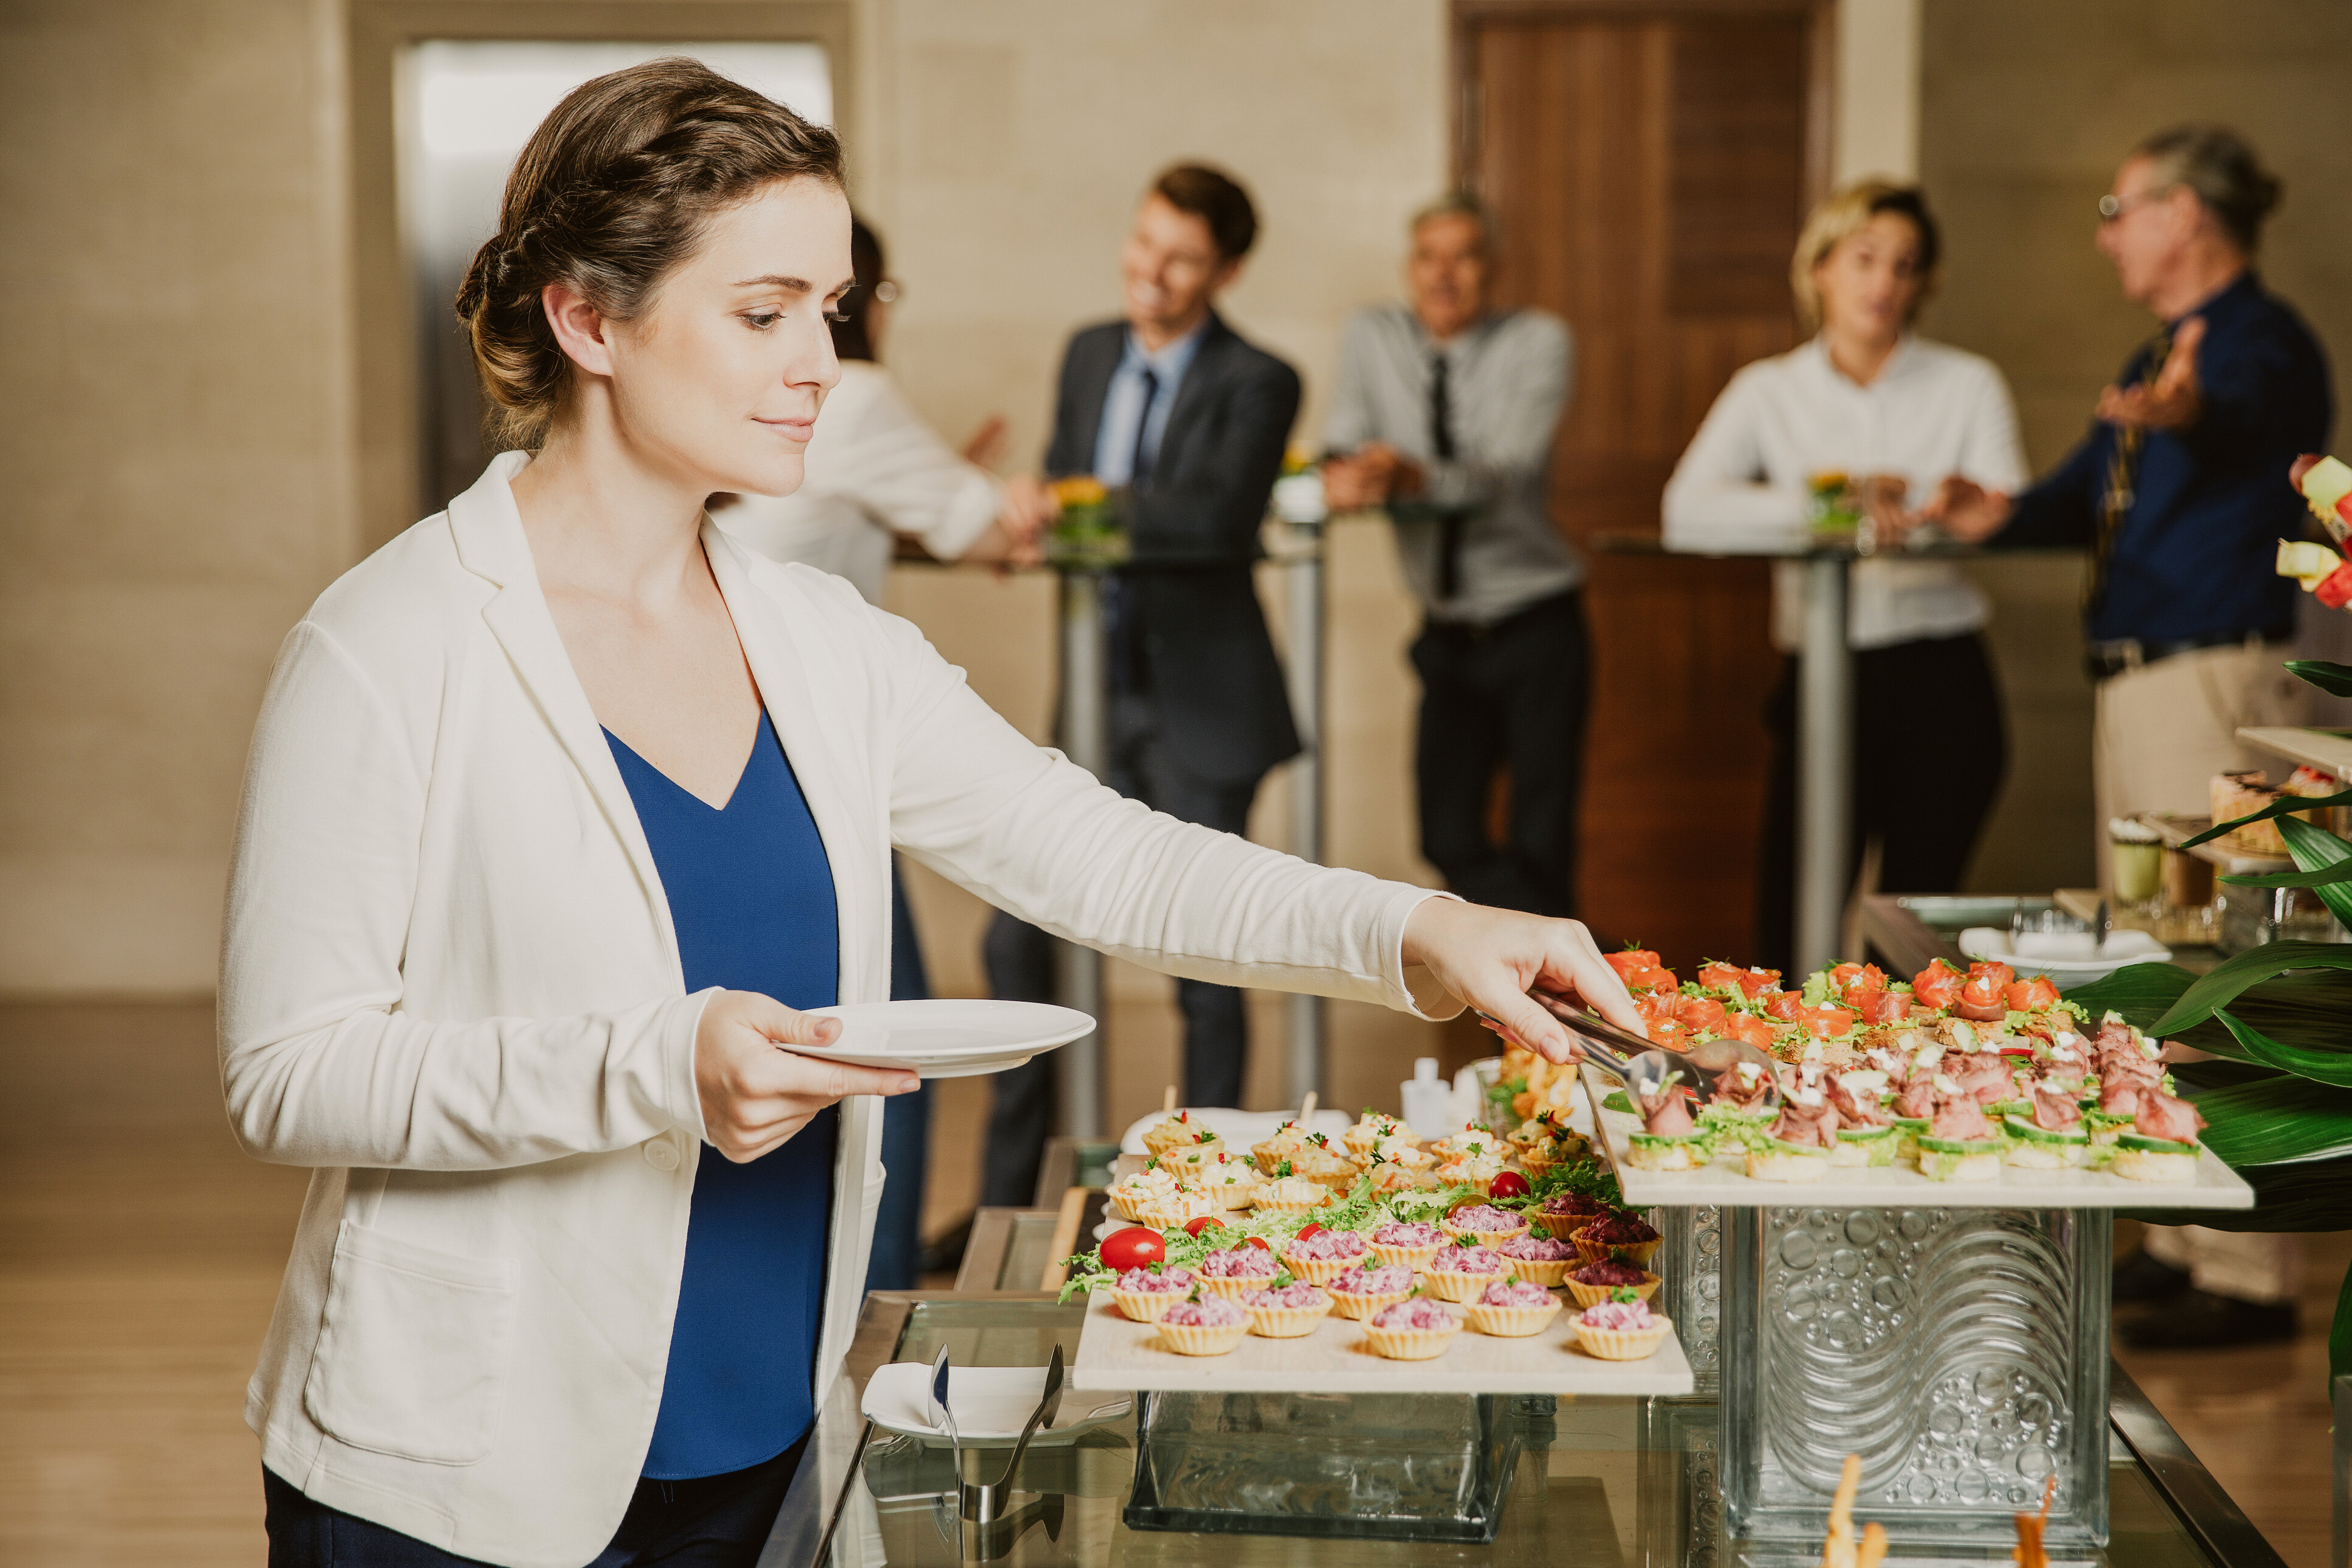 A woman in a blue shirt and and white jacket getting finger food from a caterer.